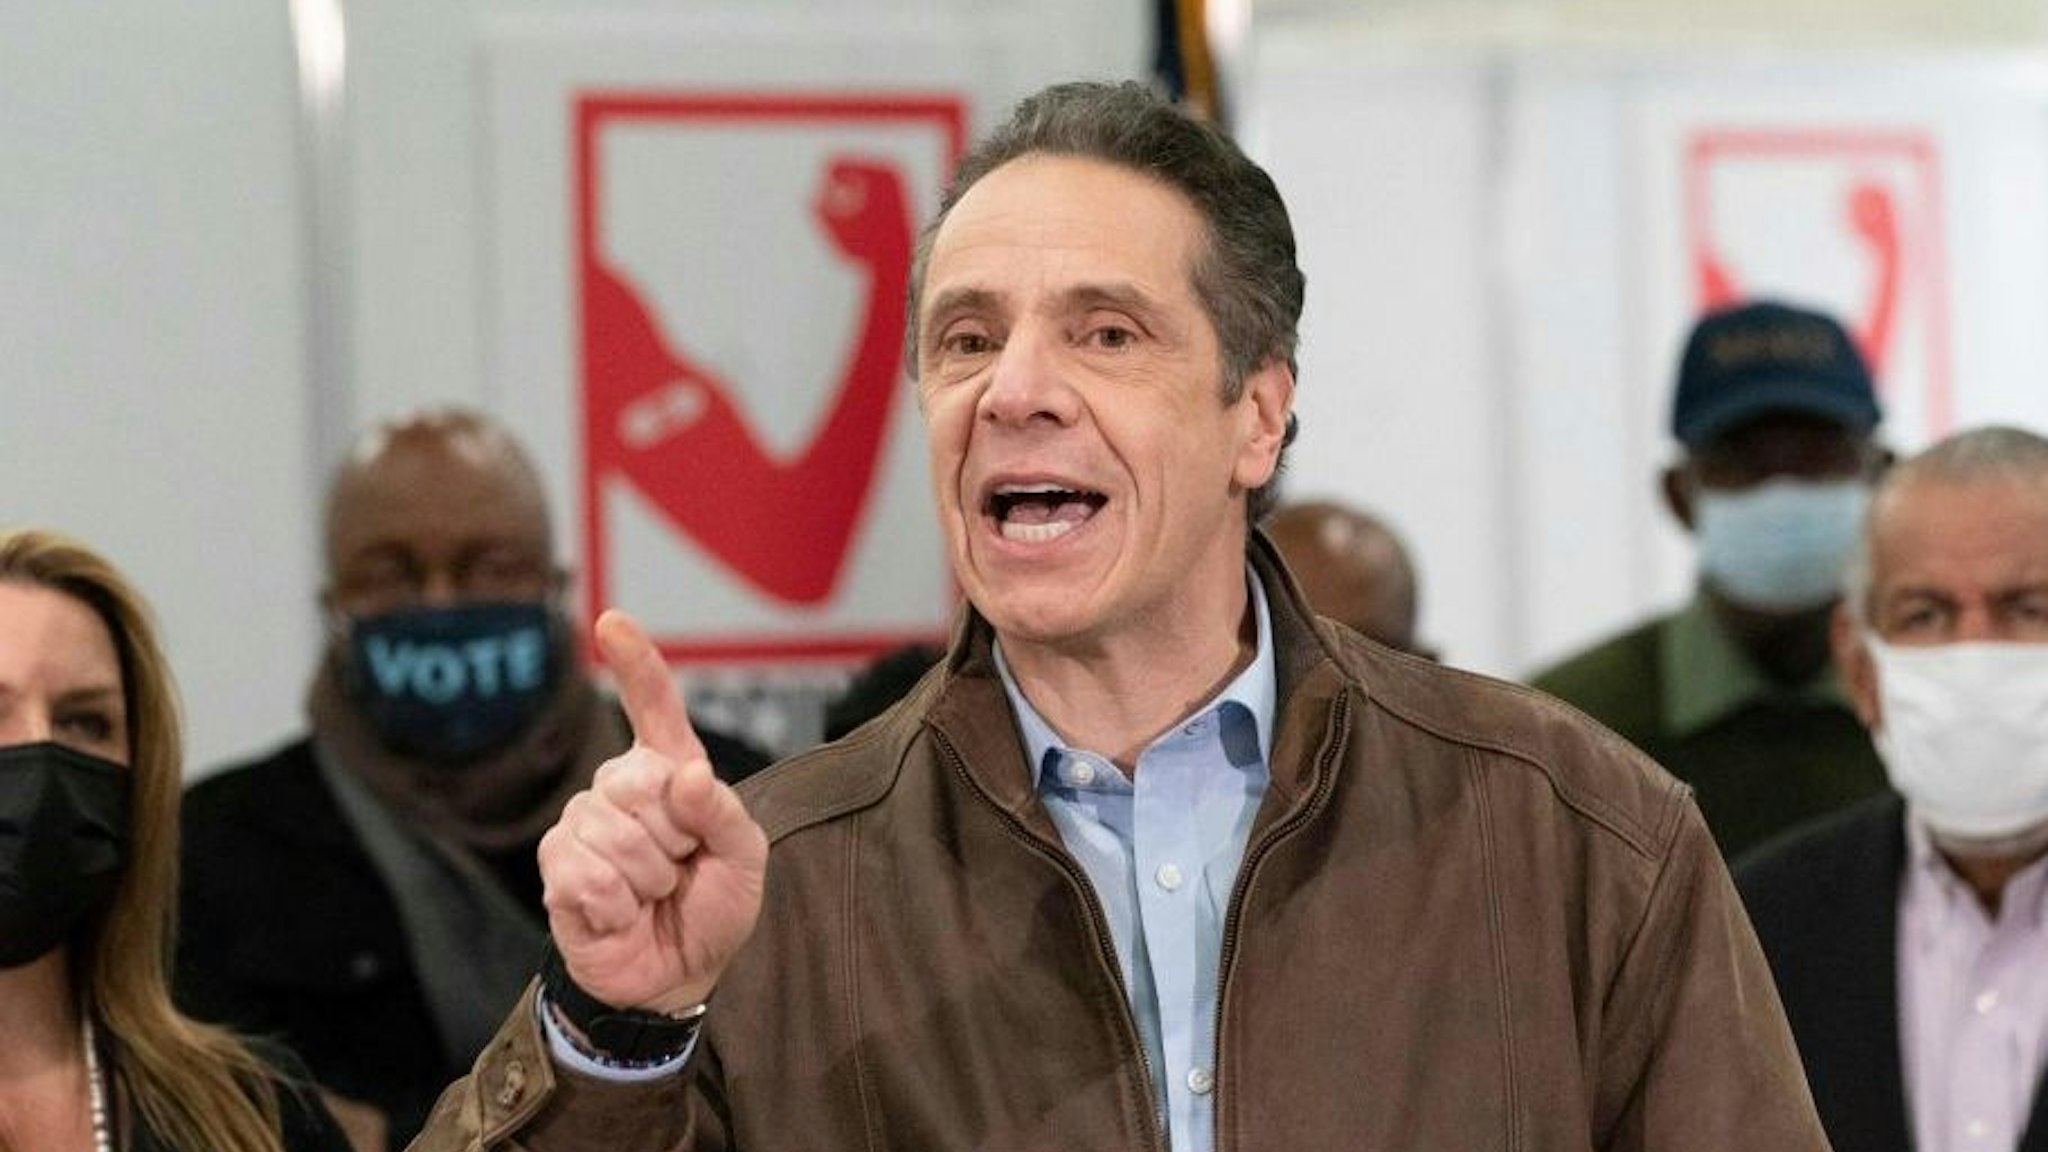 Governor Andrew Cuomo speaks during a visit to a new Covid-19 vaccination site, March 15, 2021, at the State University of New York in Old Westbury. The site is scheduled to open on Friday. (Photo by Mark Lennihan / POOL / AFP)